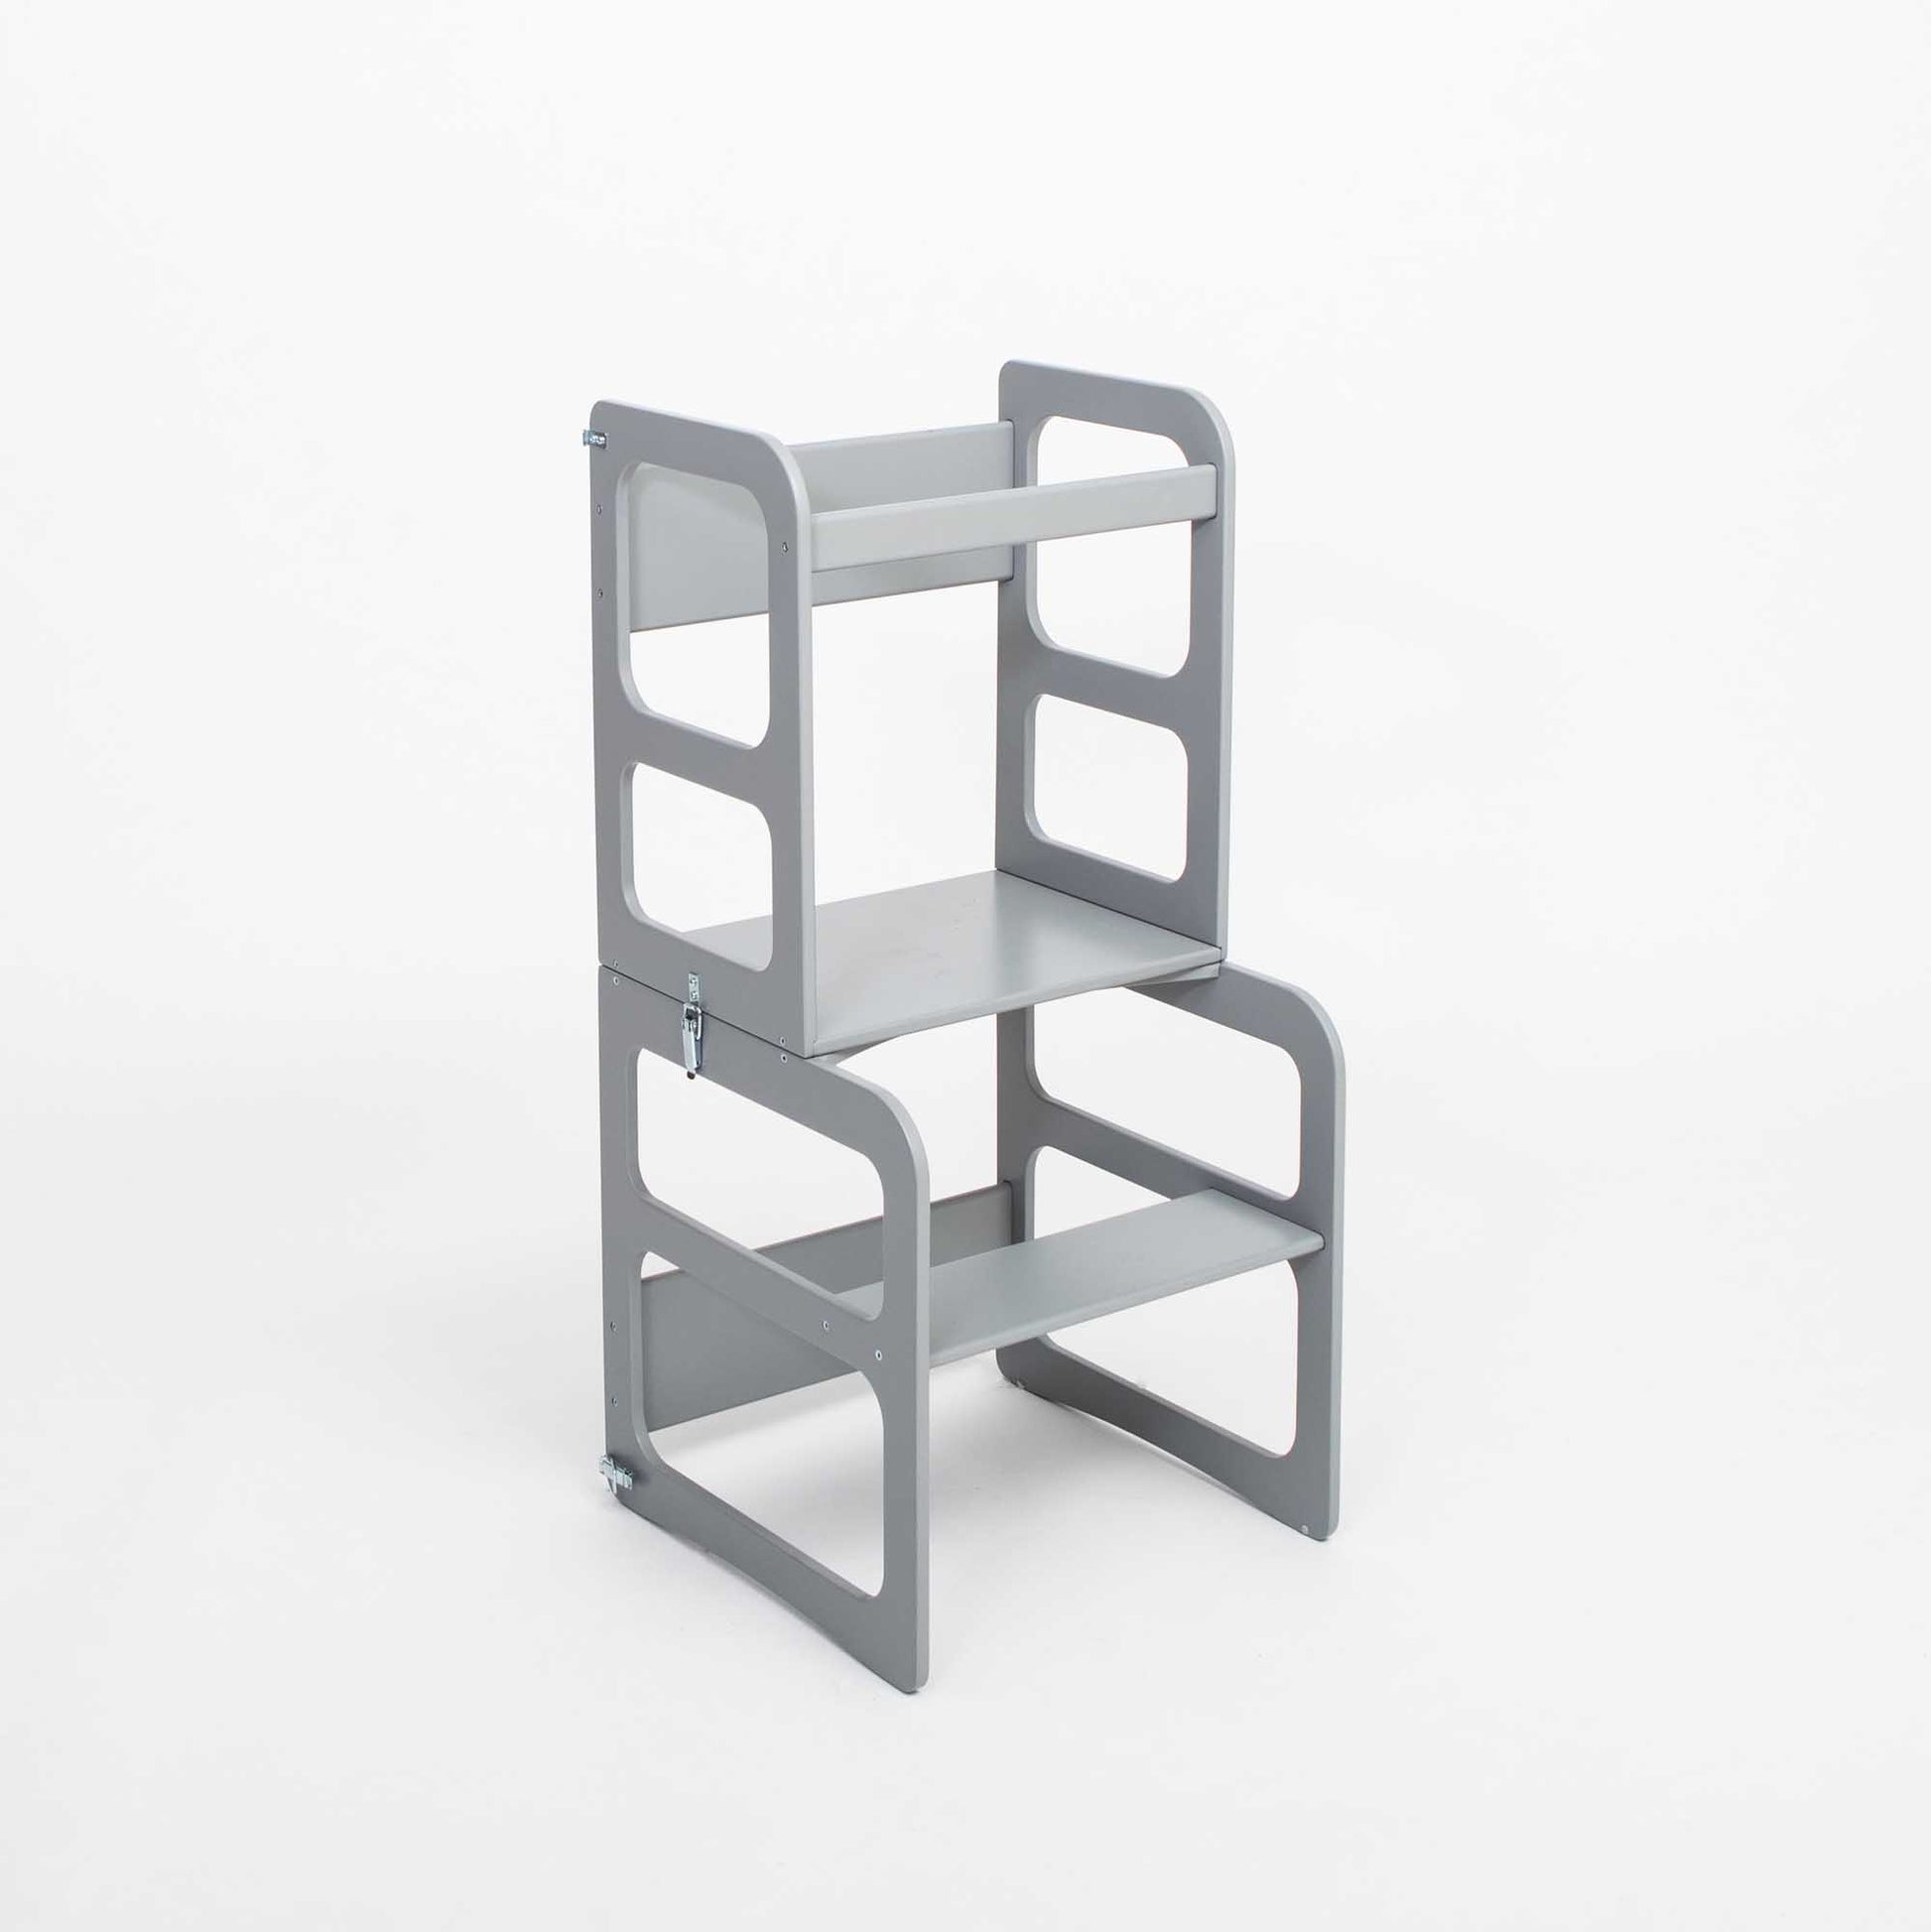 An image of a 2-in-1 transformable kitchen tower - table and chair set